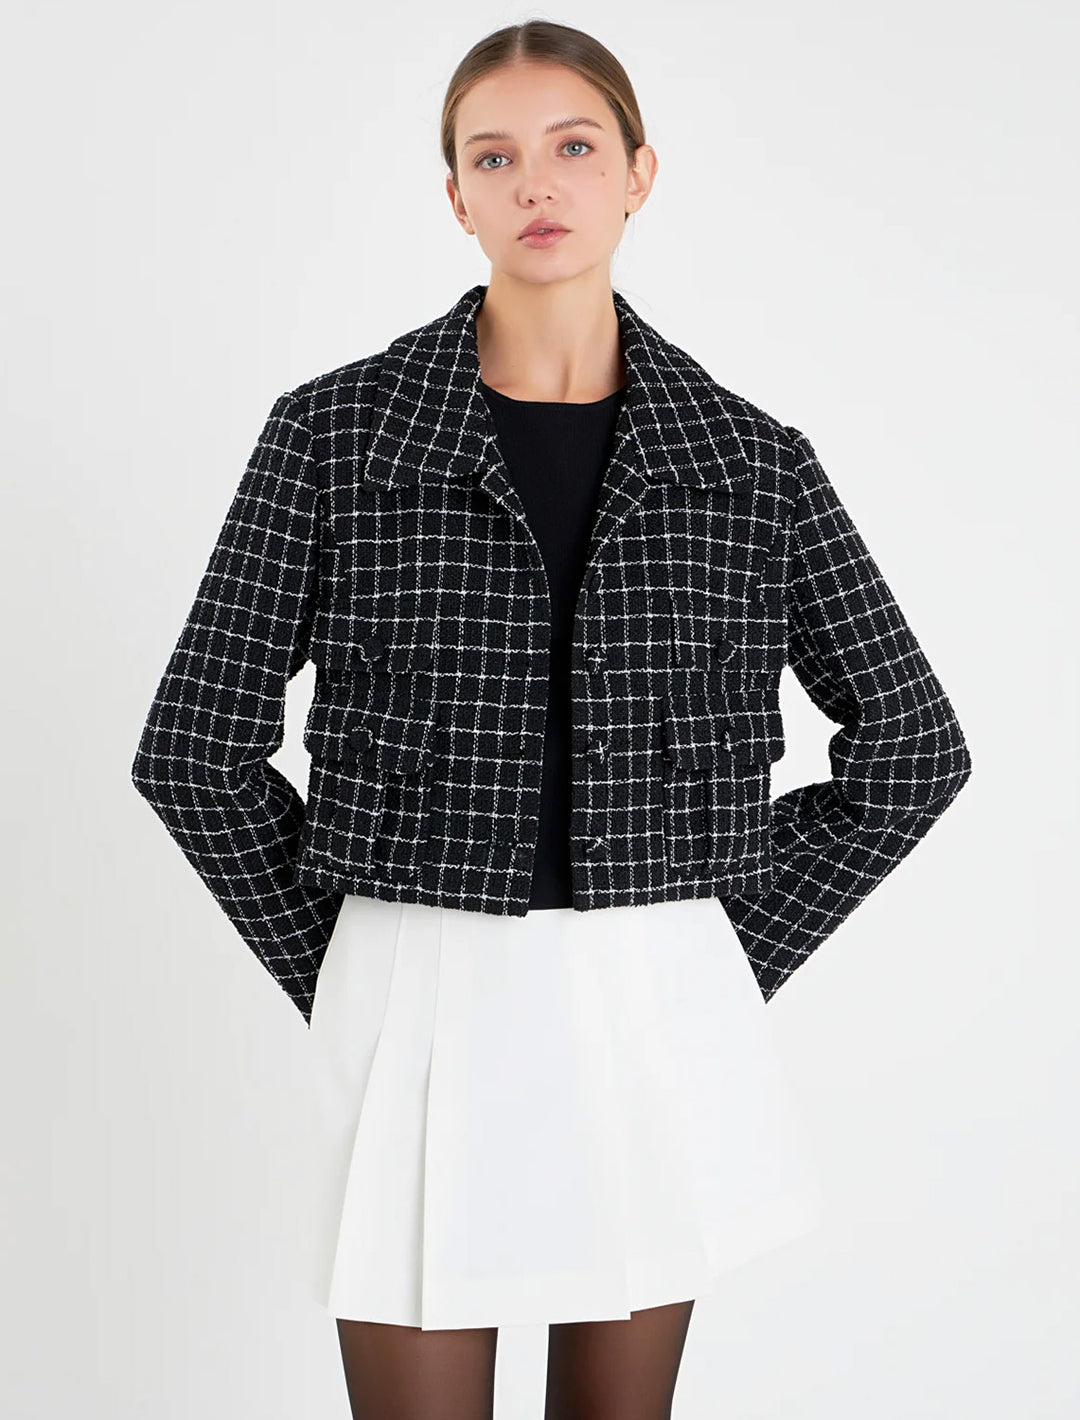 Model wearing English Factory's Tweed Jacket in Black and White.